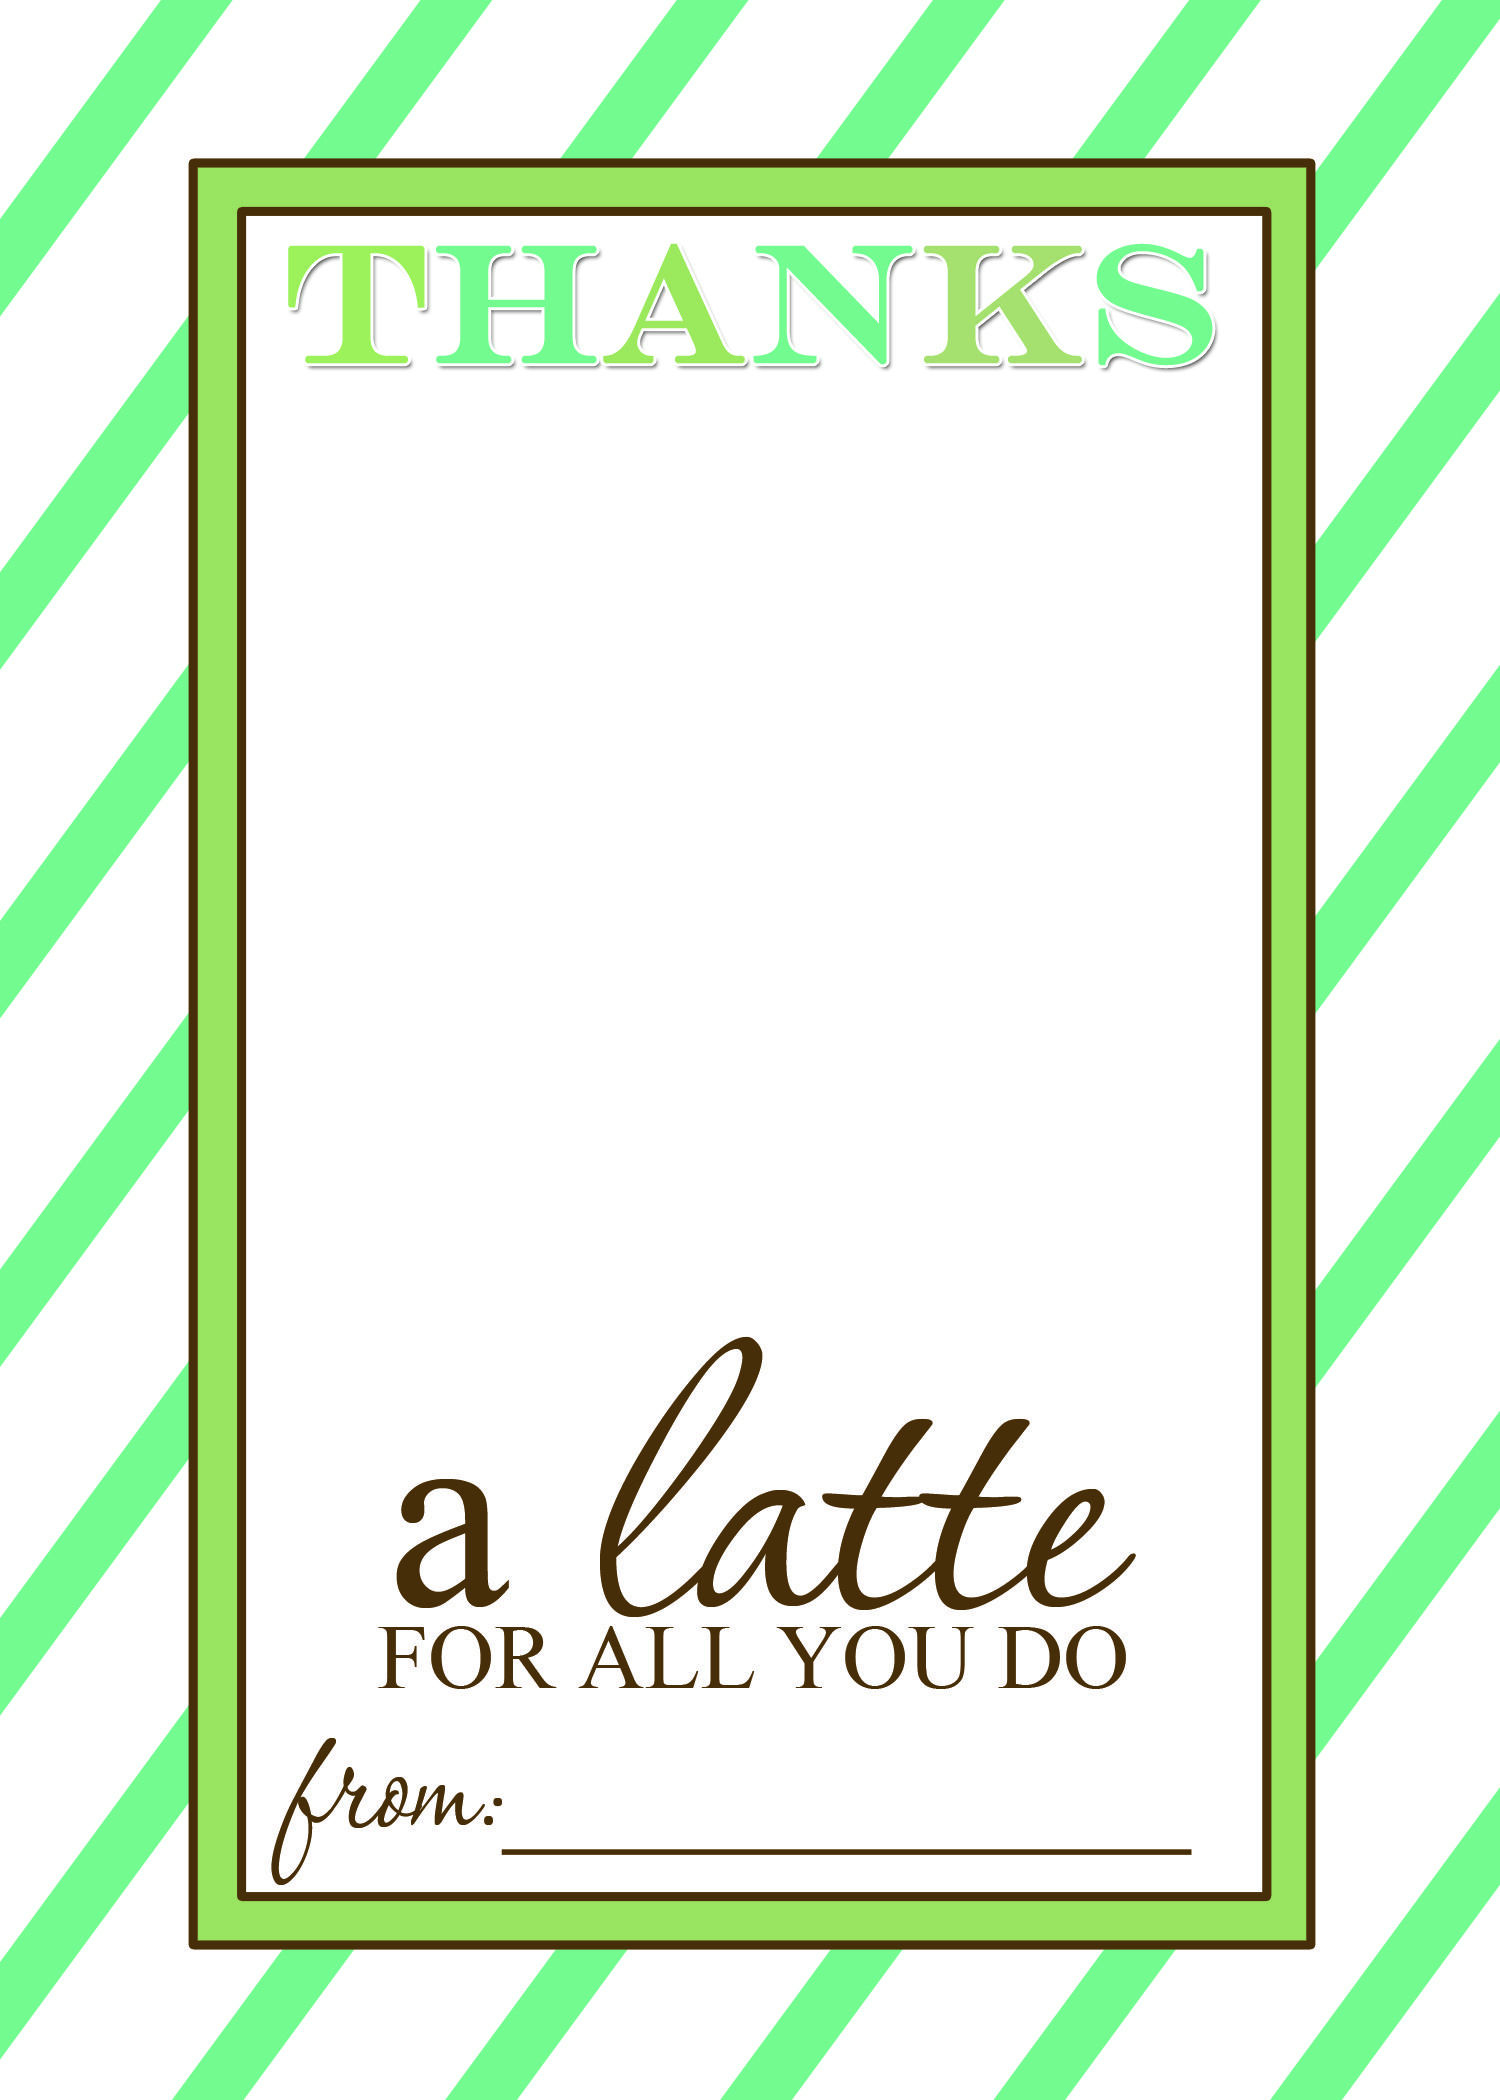 Thanks A Latte Free Printable Gift Card Holder Teacher Gift | Craft - Thanks A Latte Free Printable Gift Tag